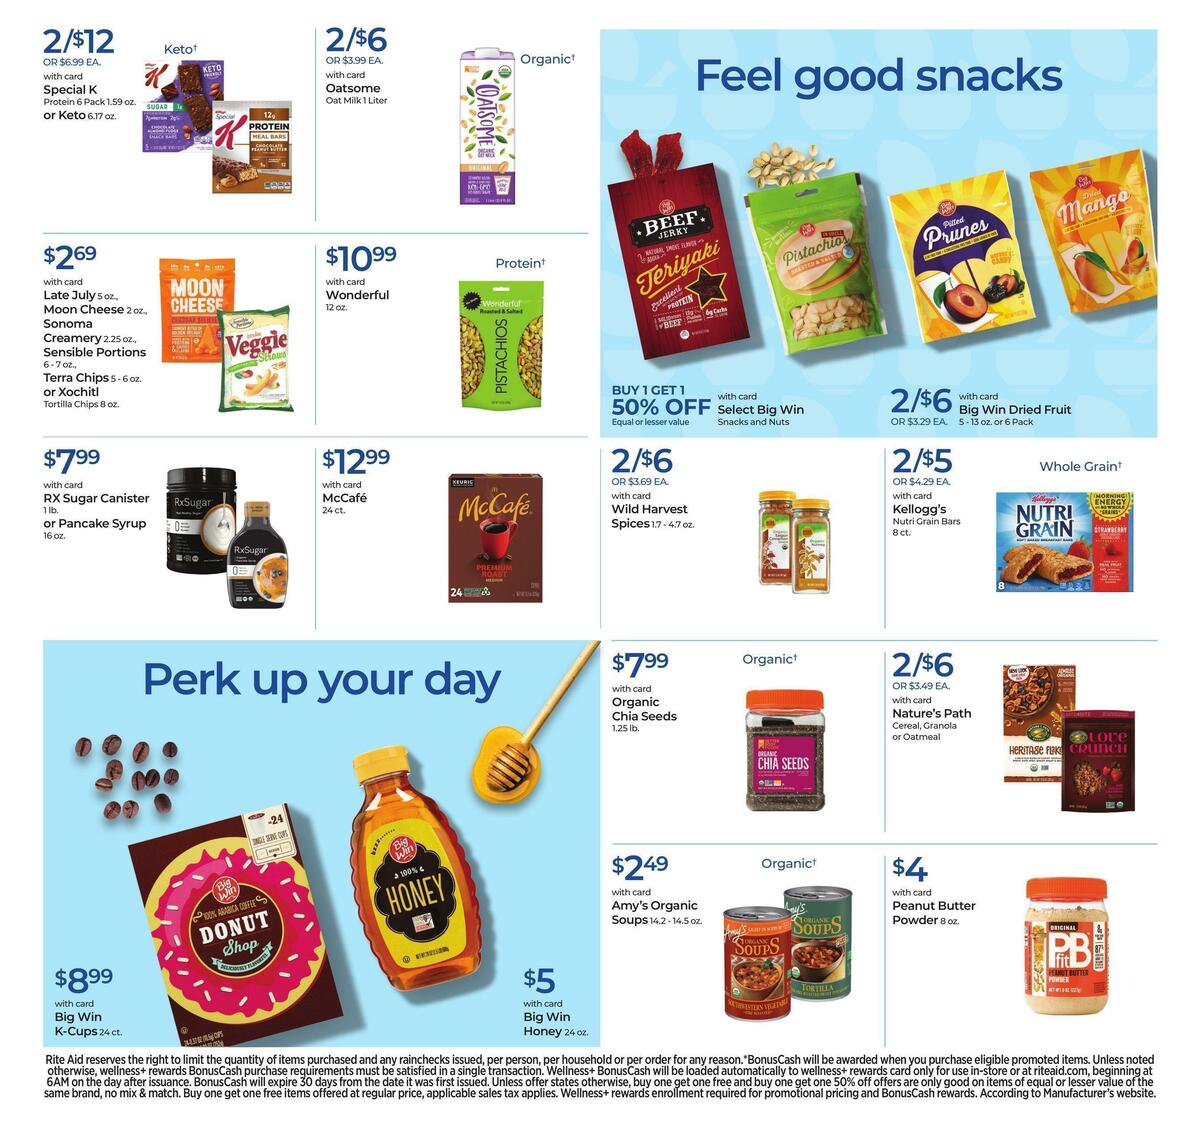 Rite Aid Weekly Ad from November 28